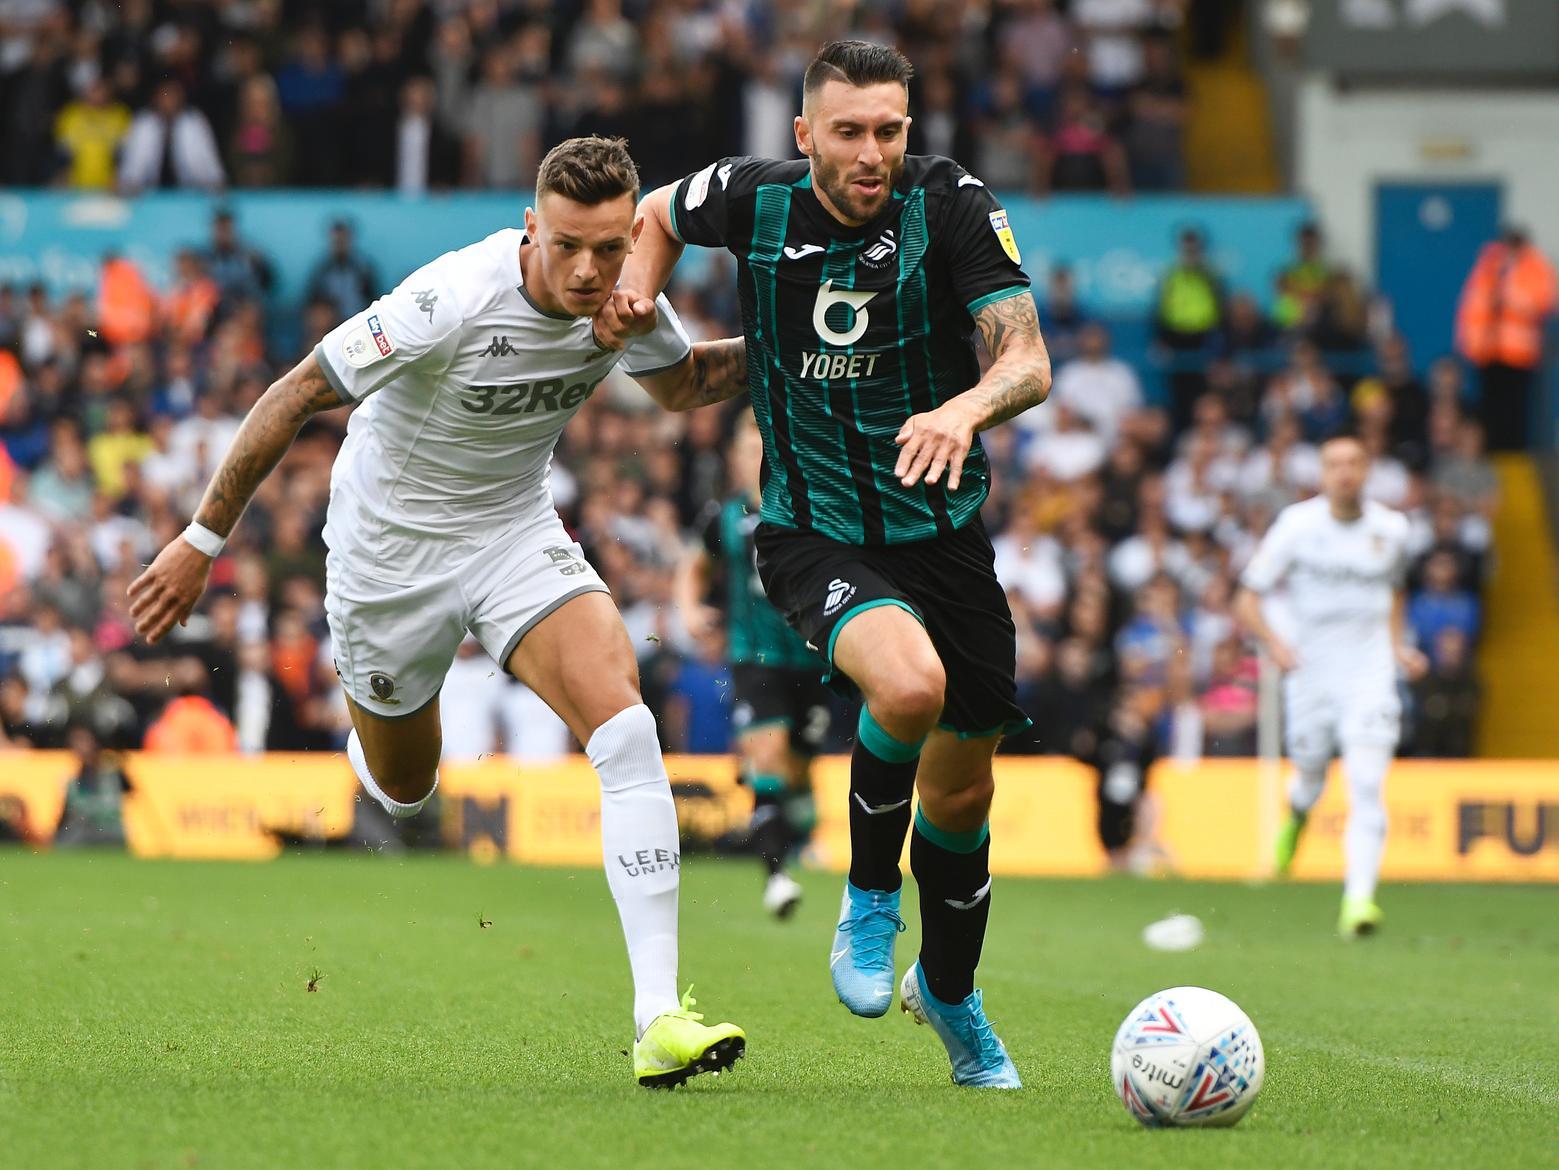 Swansea City striker Borja Baston completed a move to Aston Villa on deadline day, with Dean Smith keen for Villa to avoid relegation to The Championship. (Various)